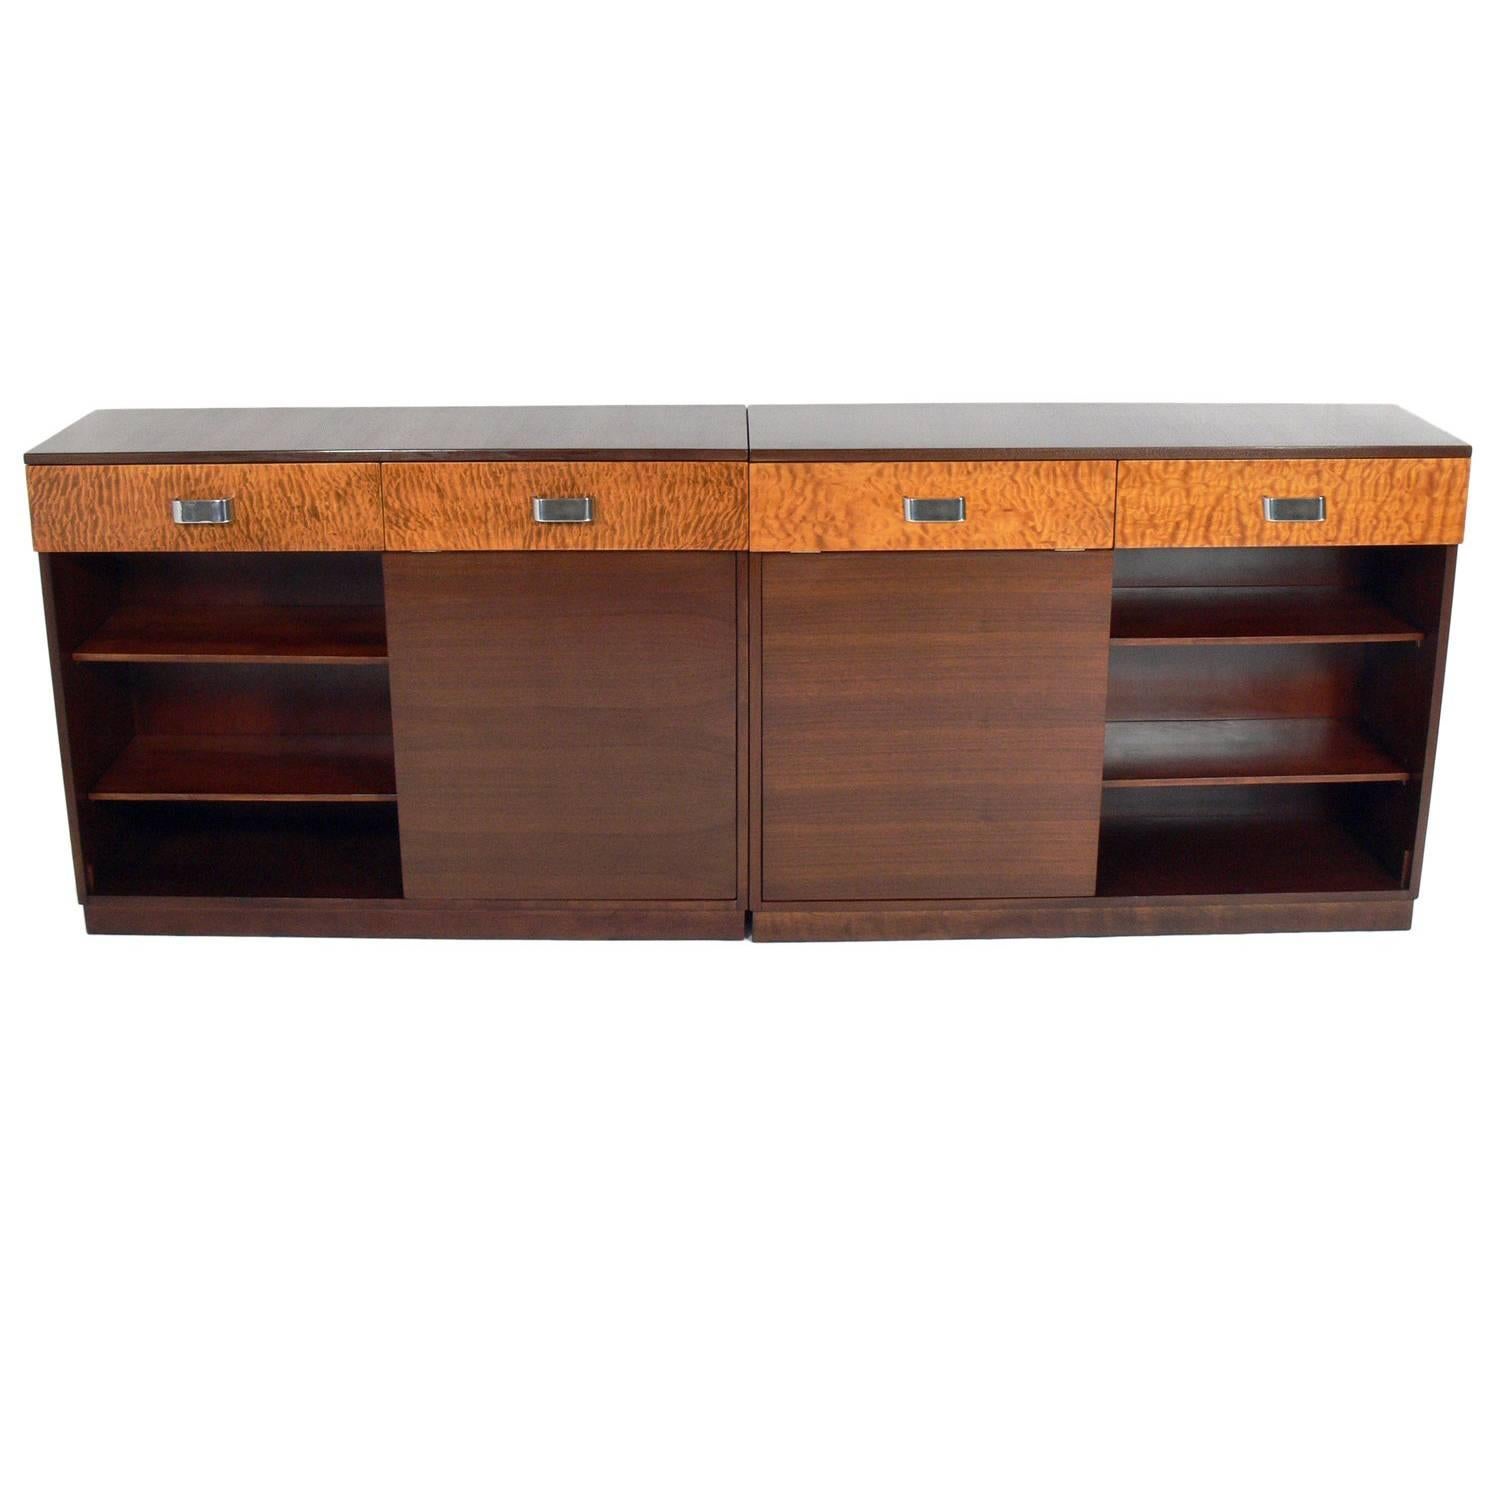 Pair of Rare Art Deco Credenzas by Russel Wright for Heywood Wakefield For Sale